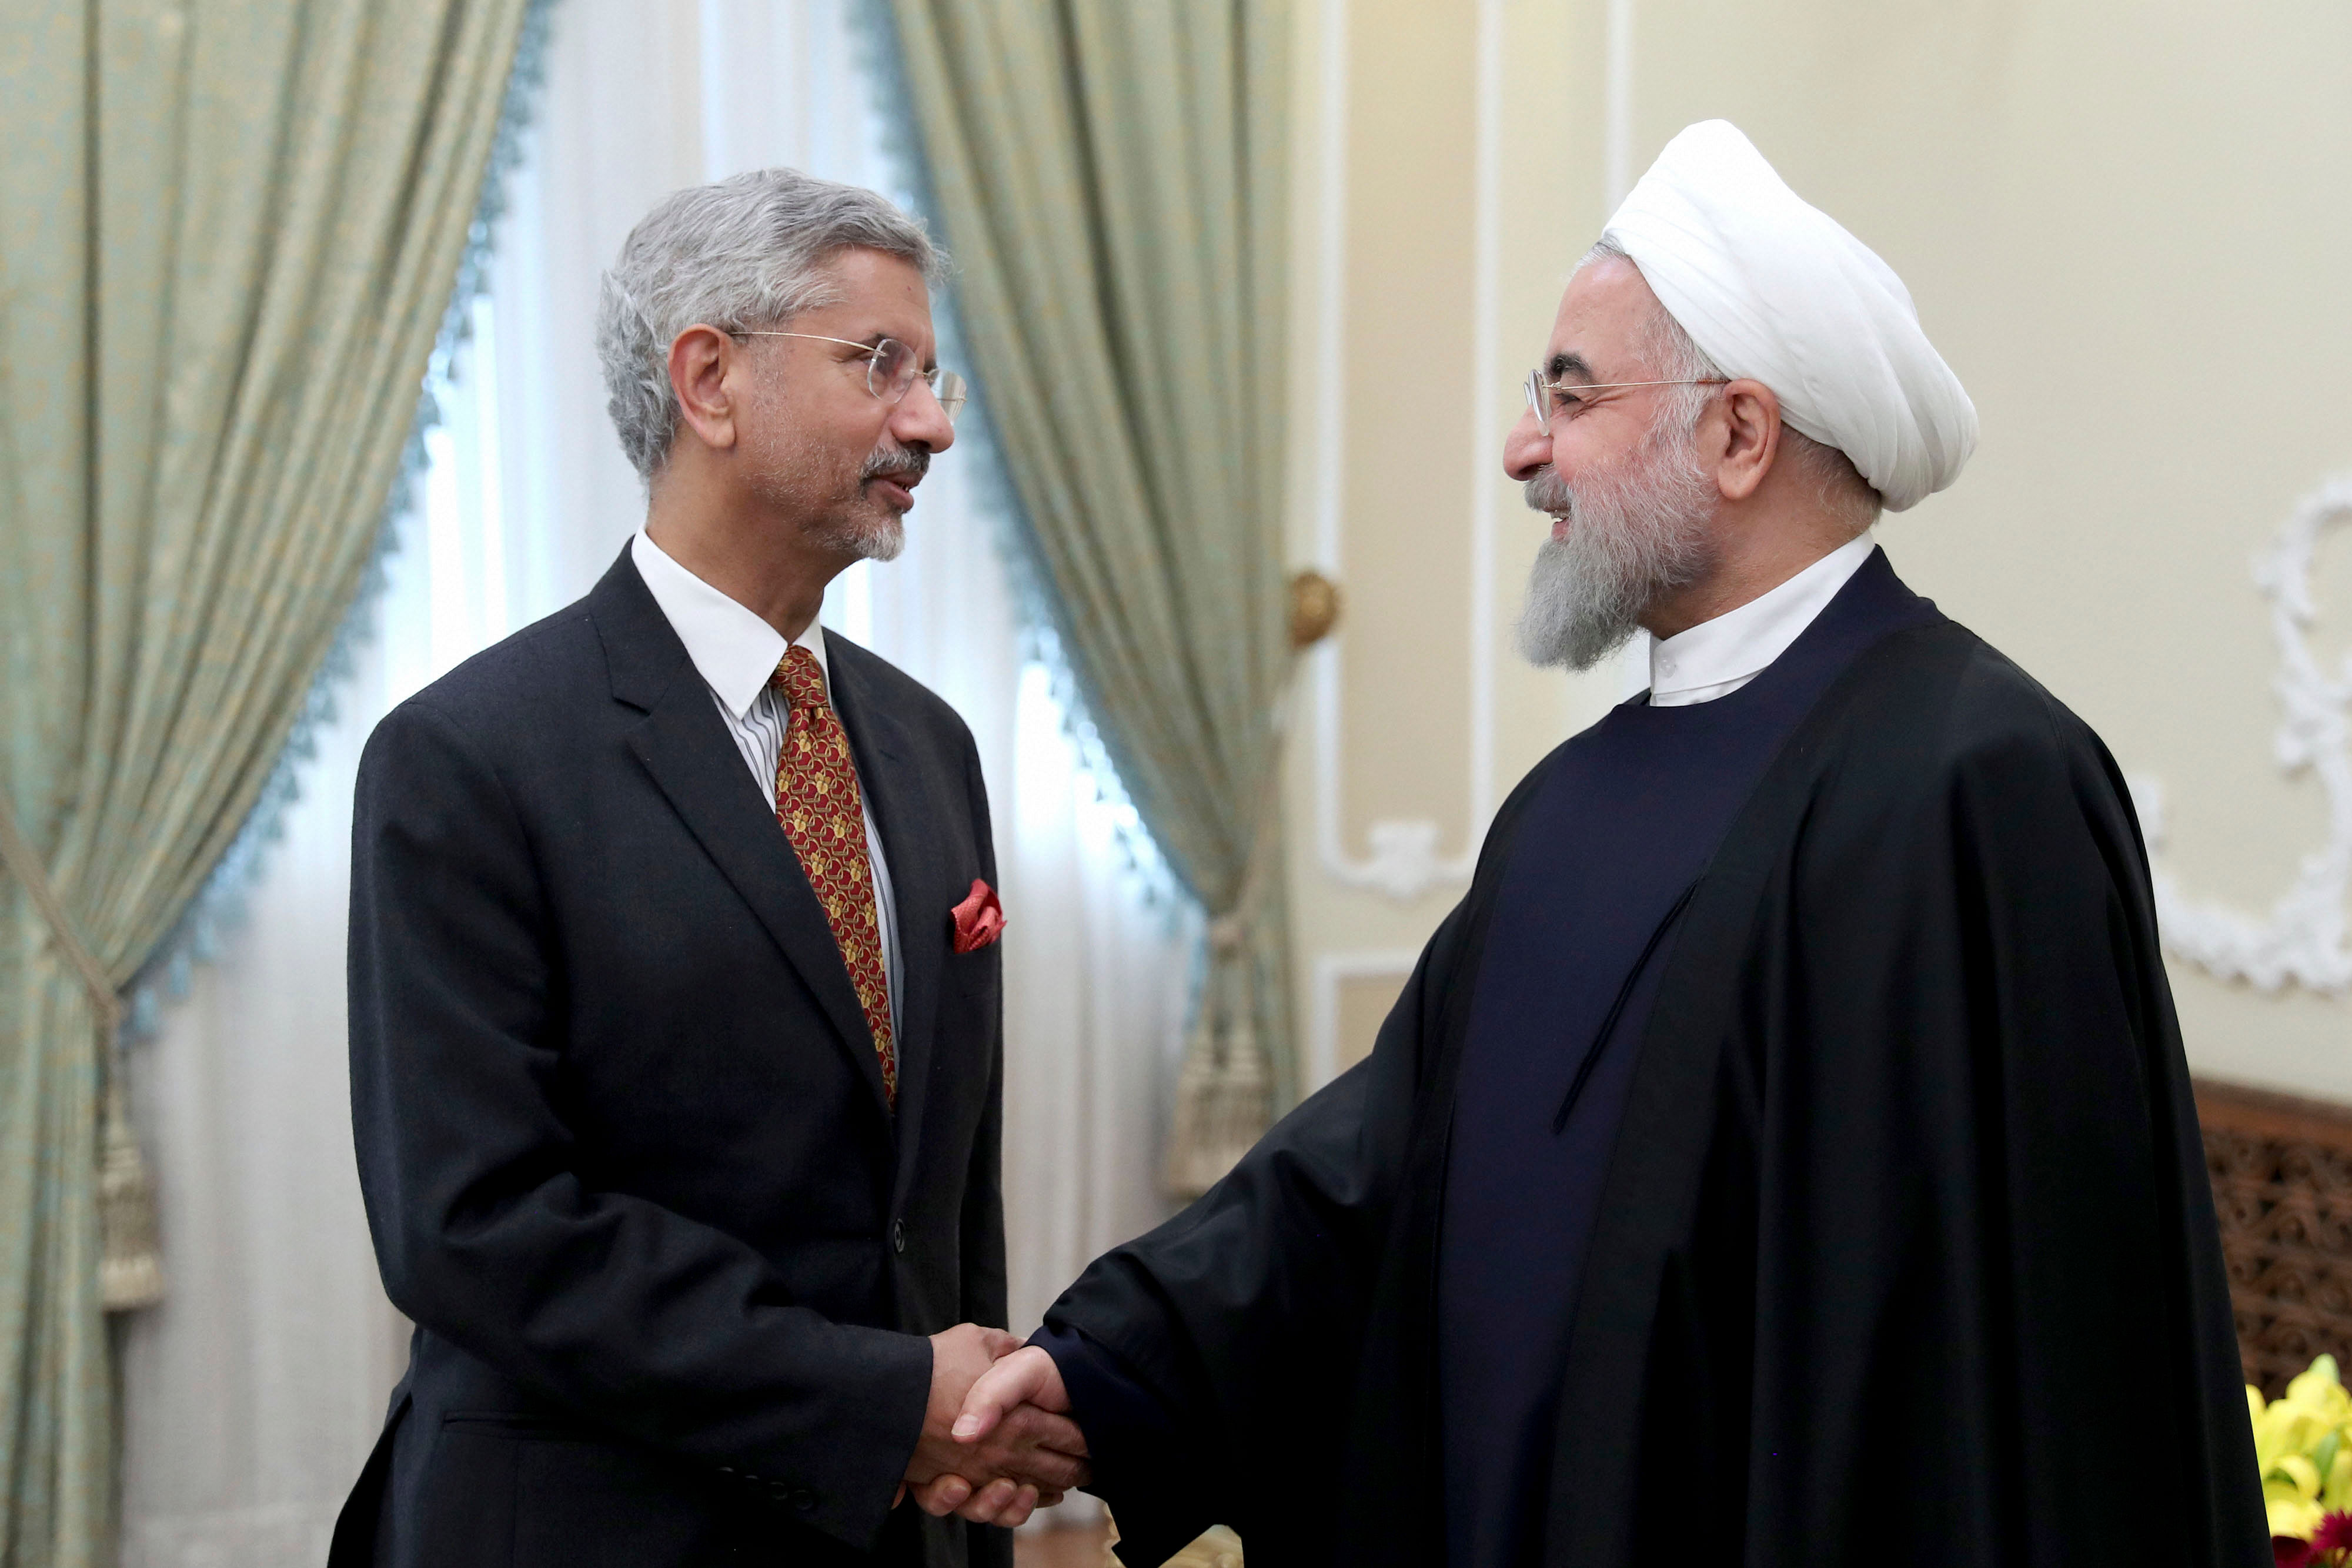 Iranian President Hassan Rouhani, right, welcomes Indian Foreign Minister Subrahmanyam Jaishankar for their meeting in Tehran, Iran. (PTI Photo)